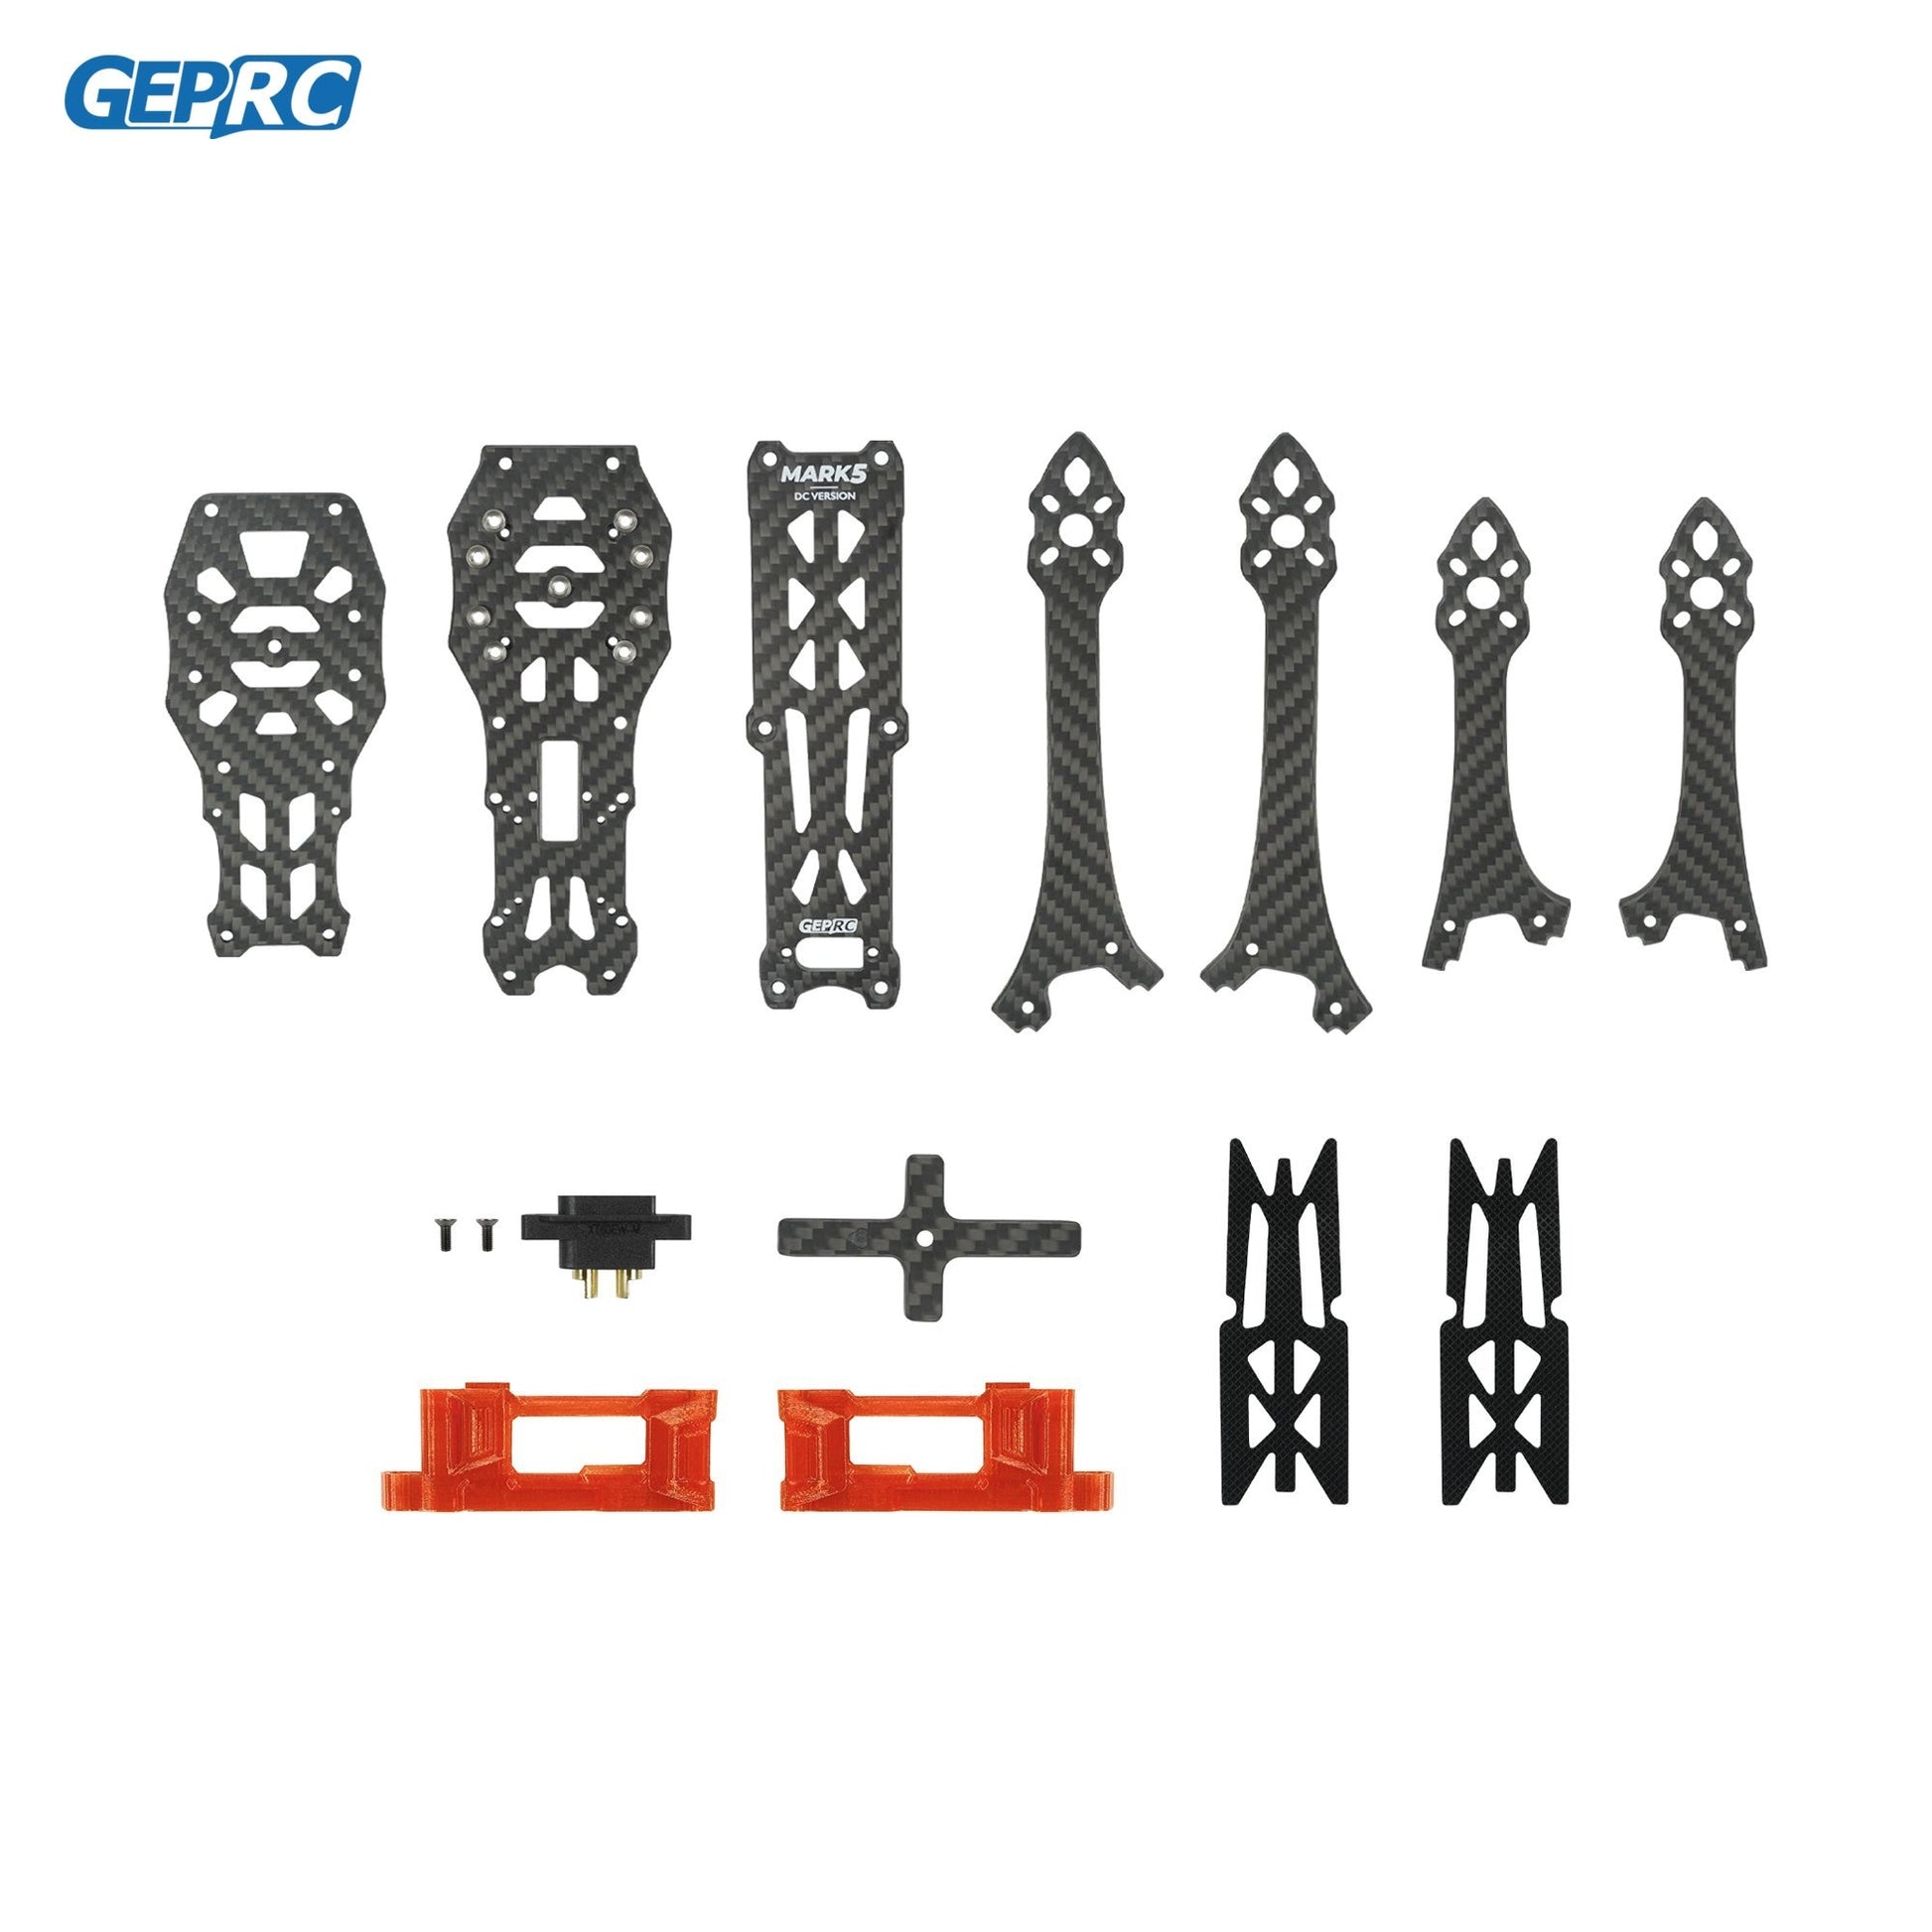 GEP-MK5D O3 MK5X to MK5D Conve DeadCat Frame - Parts Propeller Accessory Base Quadcopter FPV Freestyle RC Racing Drone Mark5